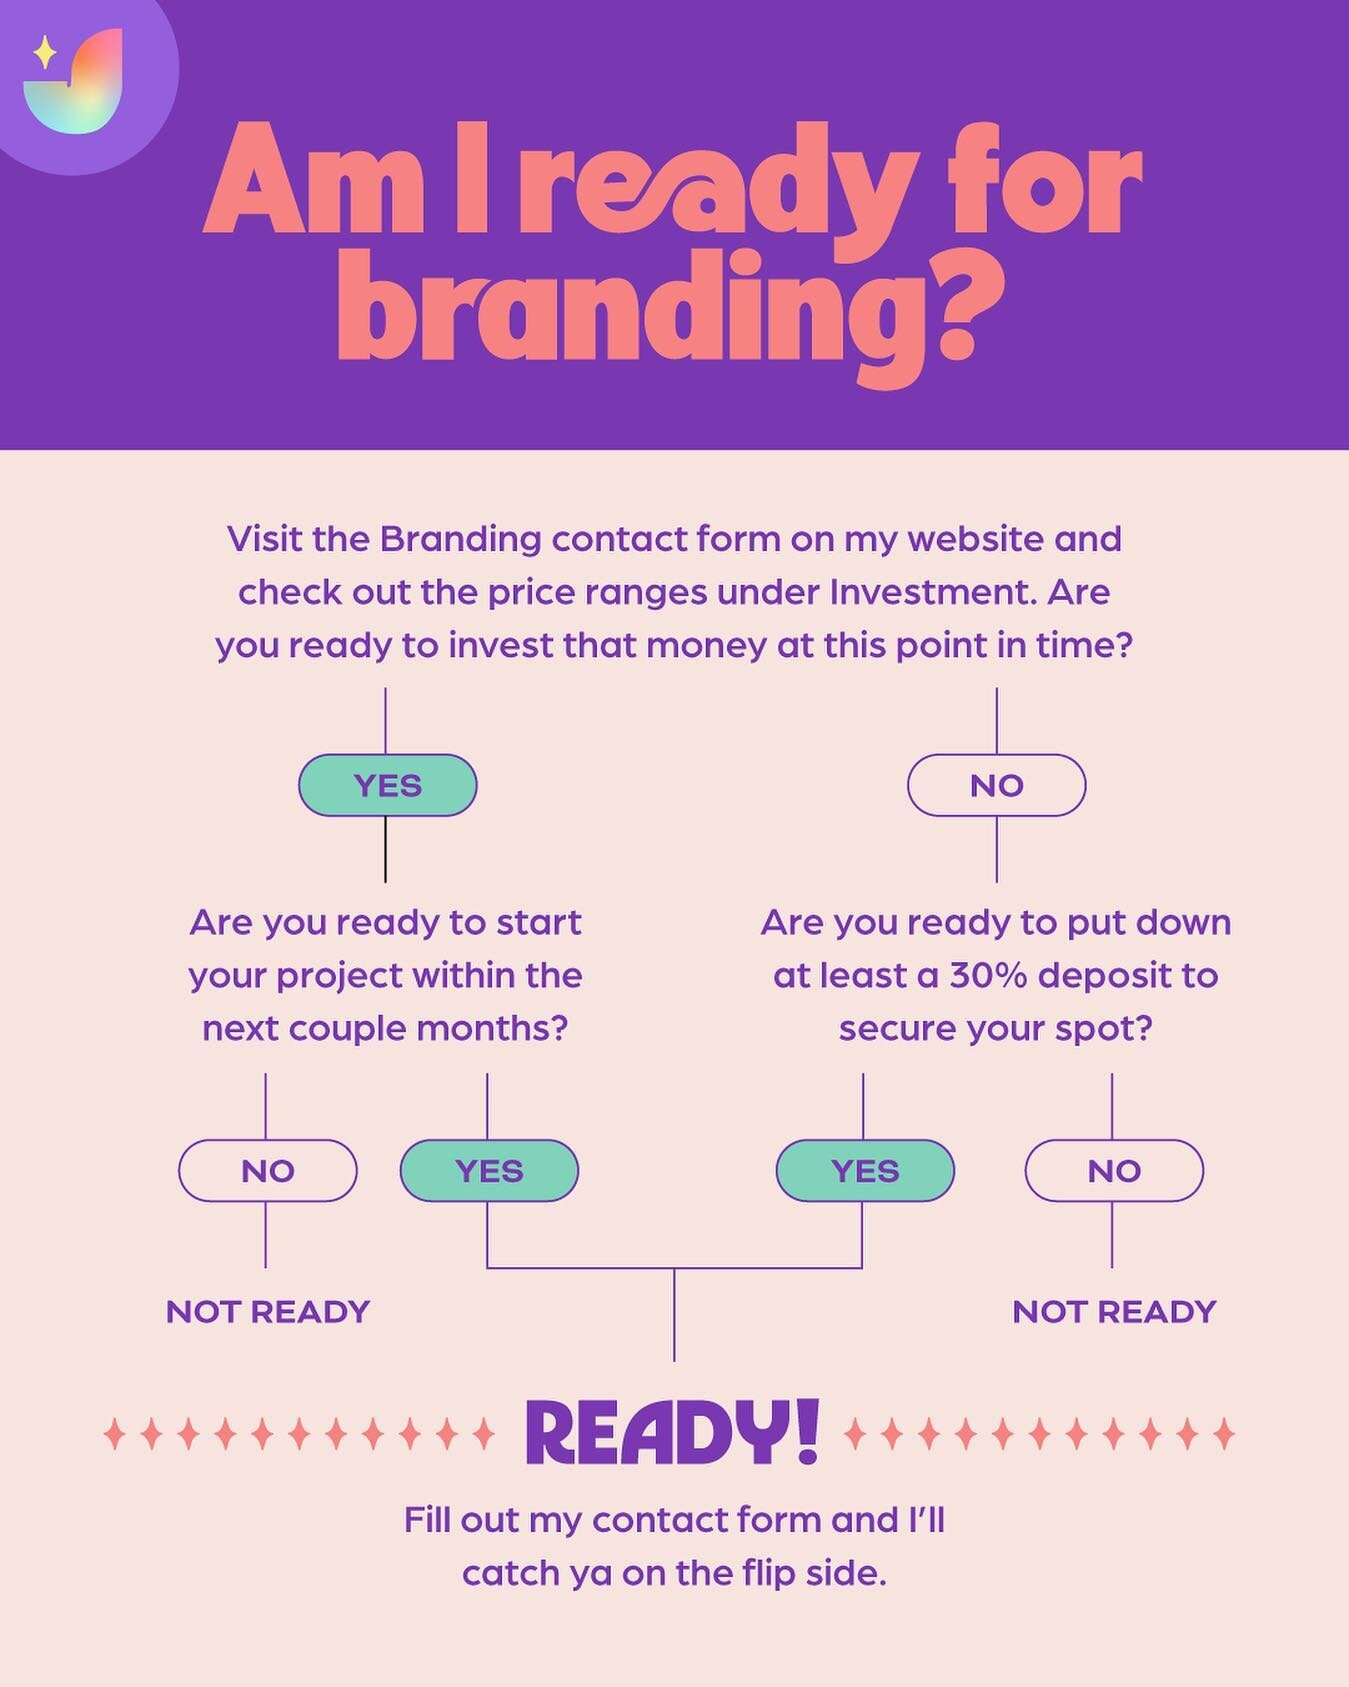 Thinking about branding your business? Before you inquire, follow this nifty little chart to make sure you&rsquo;re ready.

1. The first thing you want to do is head to the Branding contact form on my website. Check out the price ranges under Investm